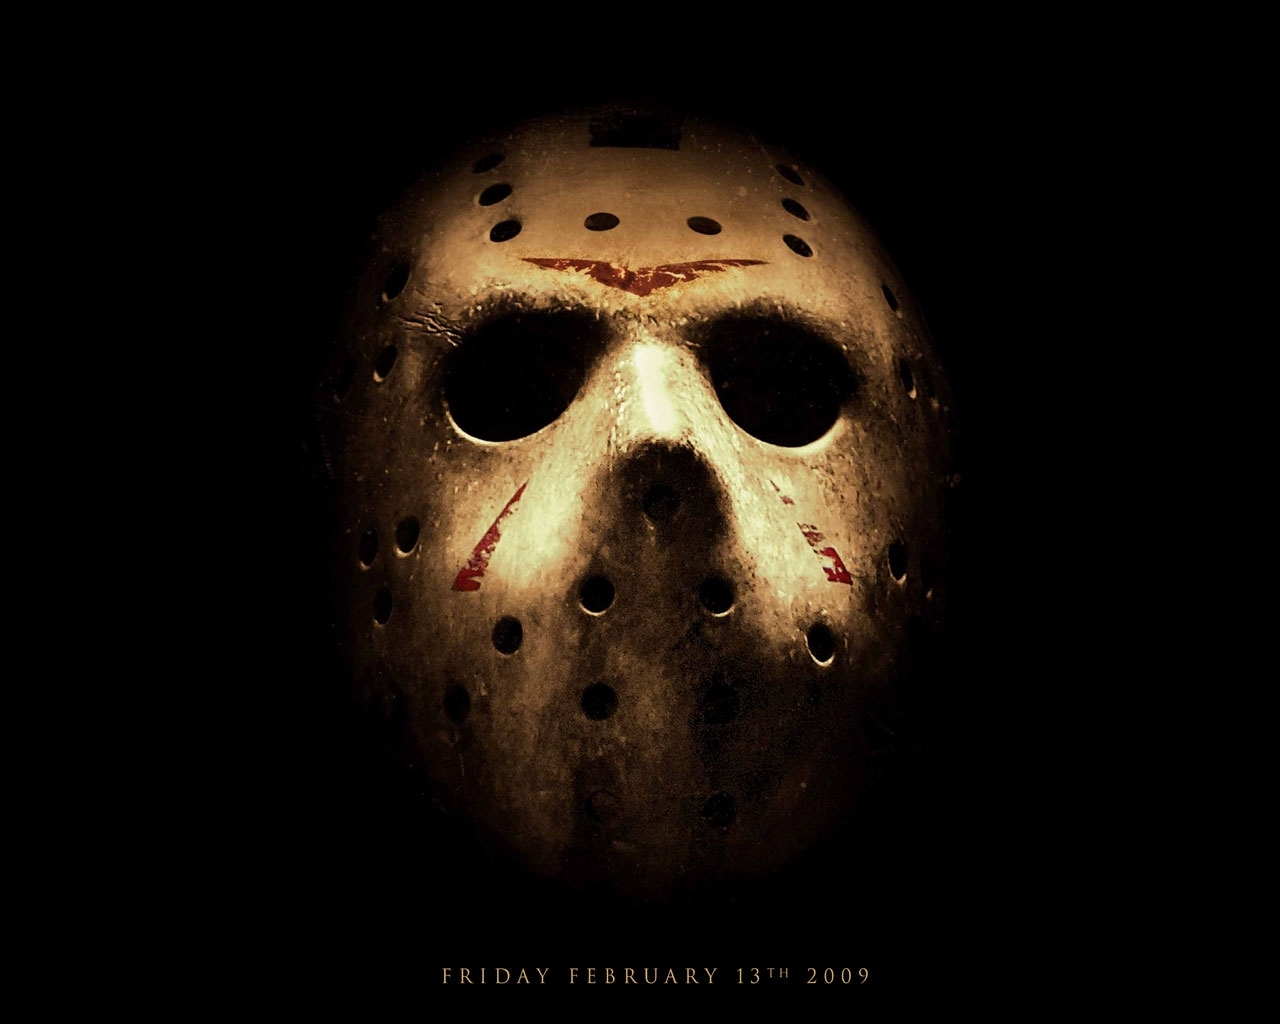 1555 free wallpaper 320x480 for phone, download images cinema, friday the 13th, black 320x480 for mobile